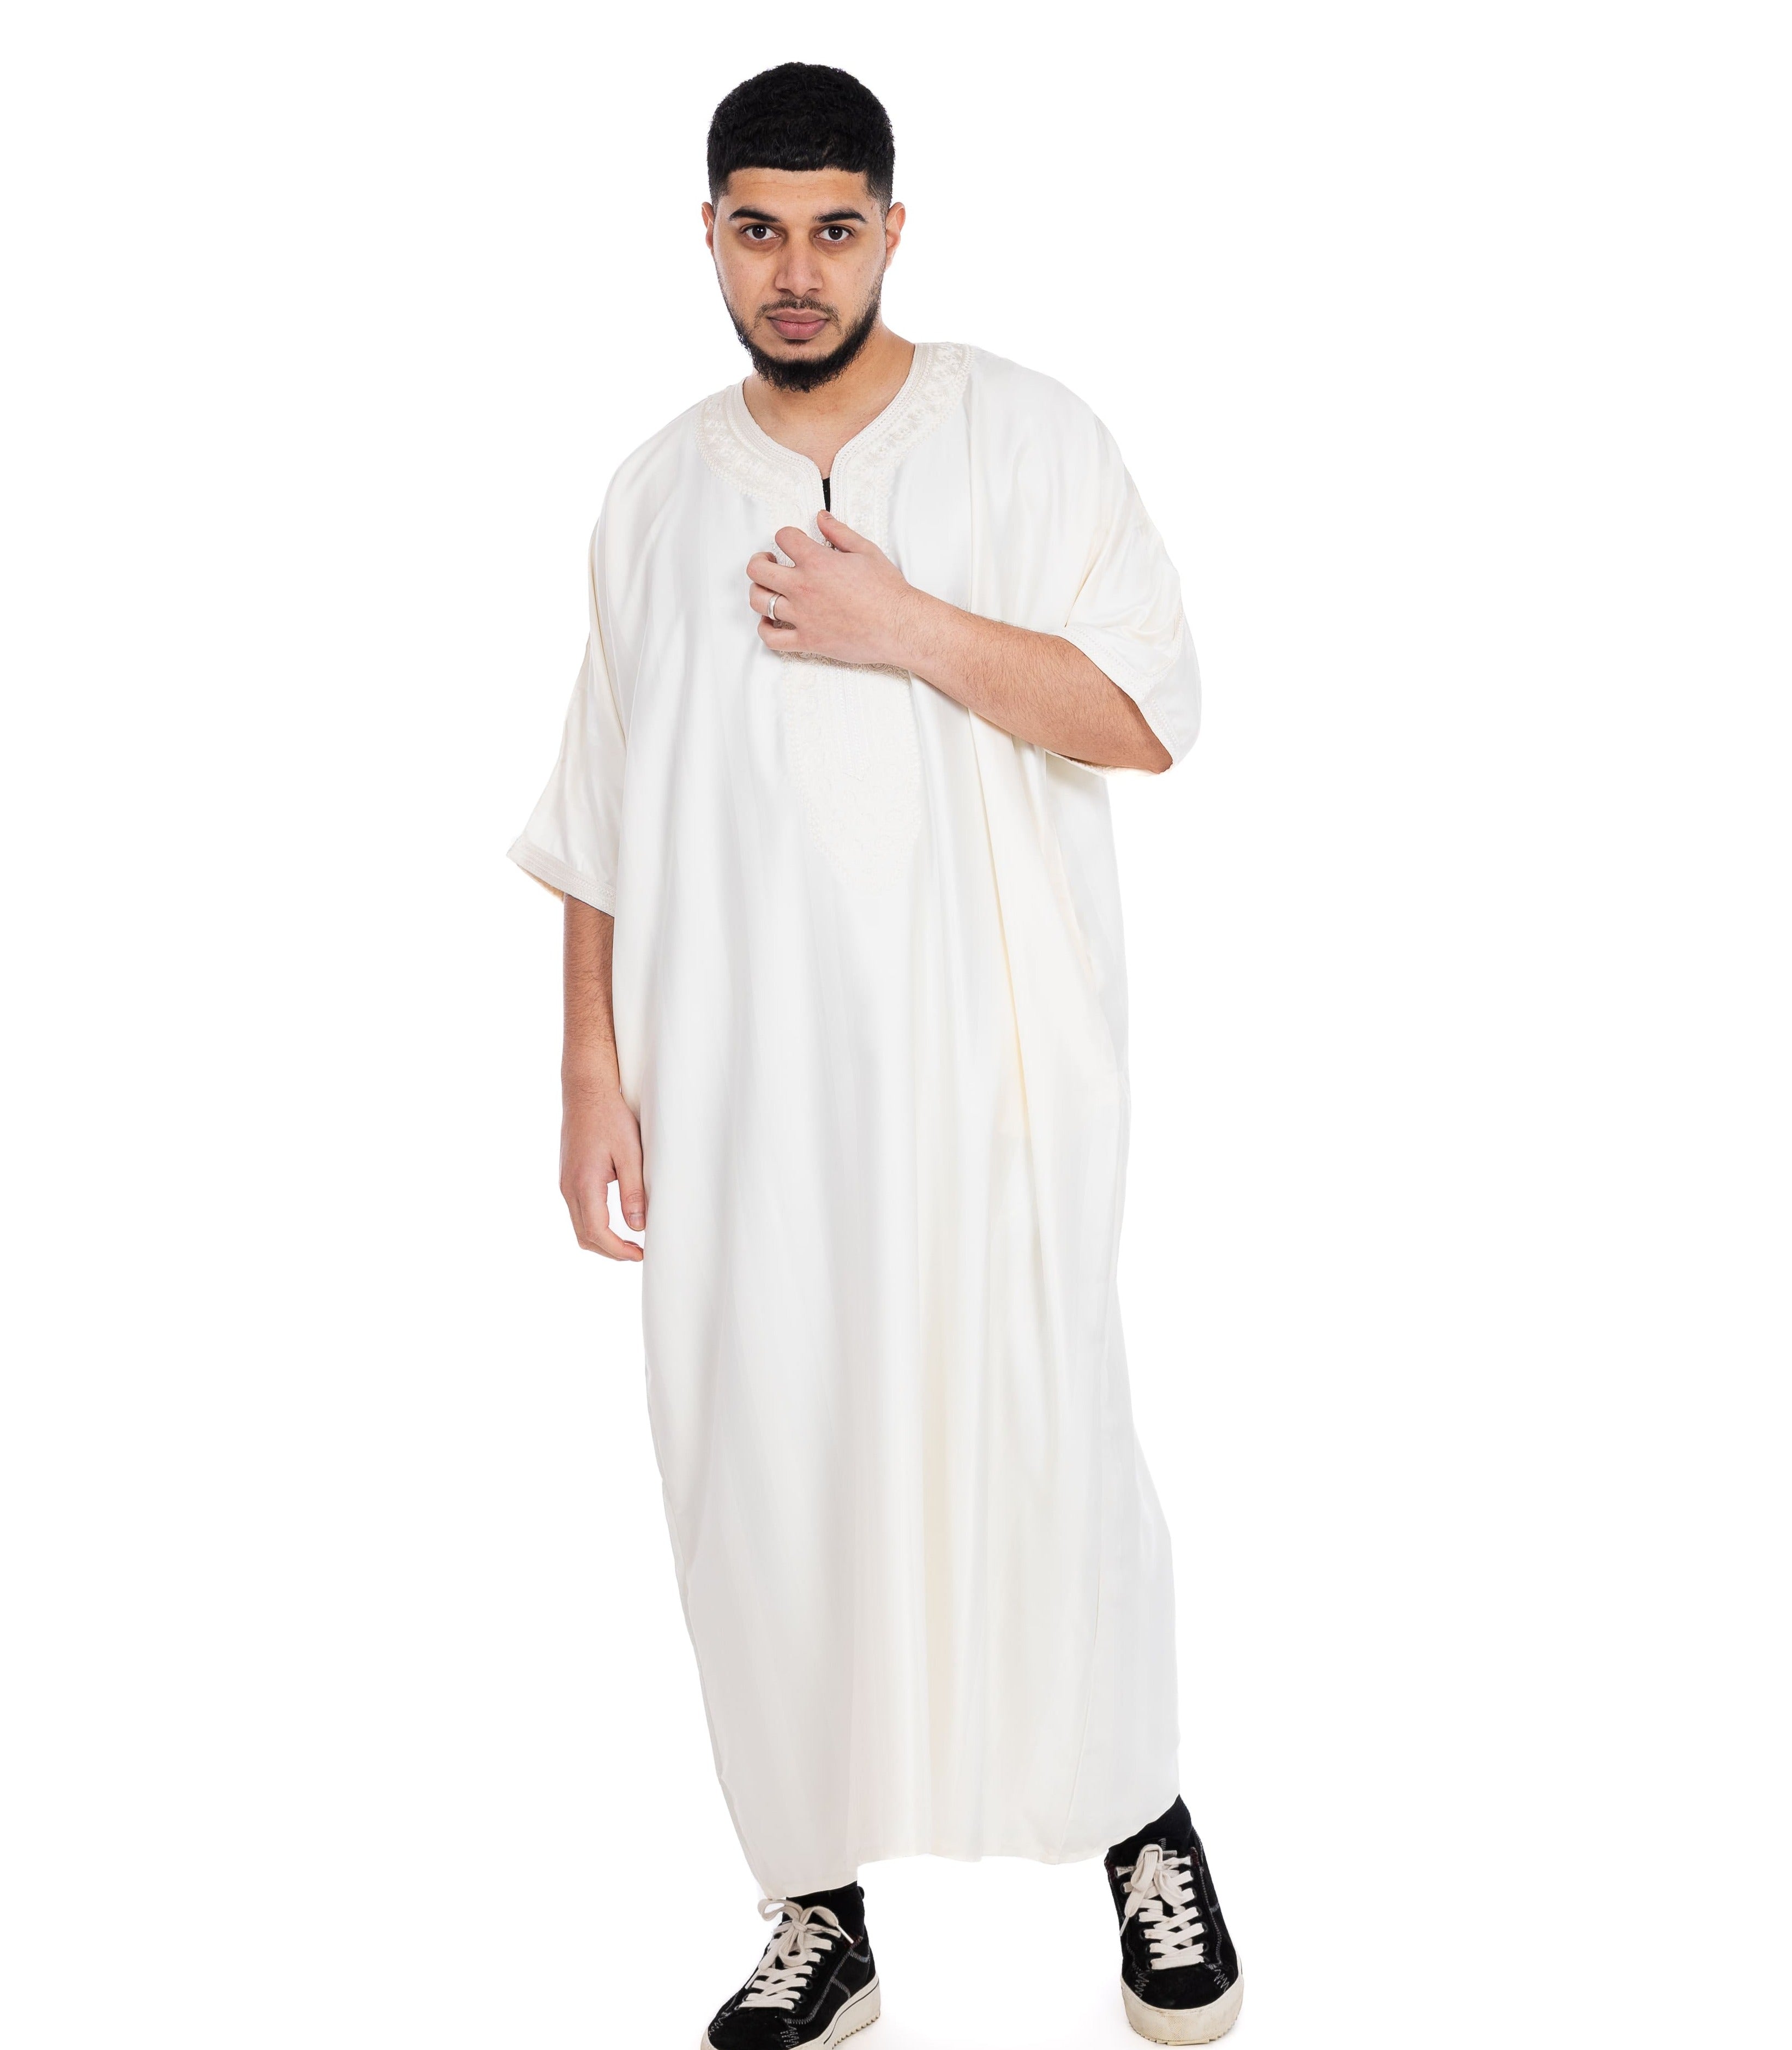 Offwhite Shiny Jawhara moroccan Thobe Collection - newarabia Apparel & Accessories